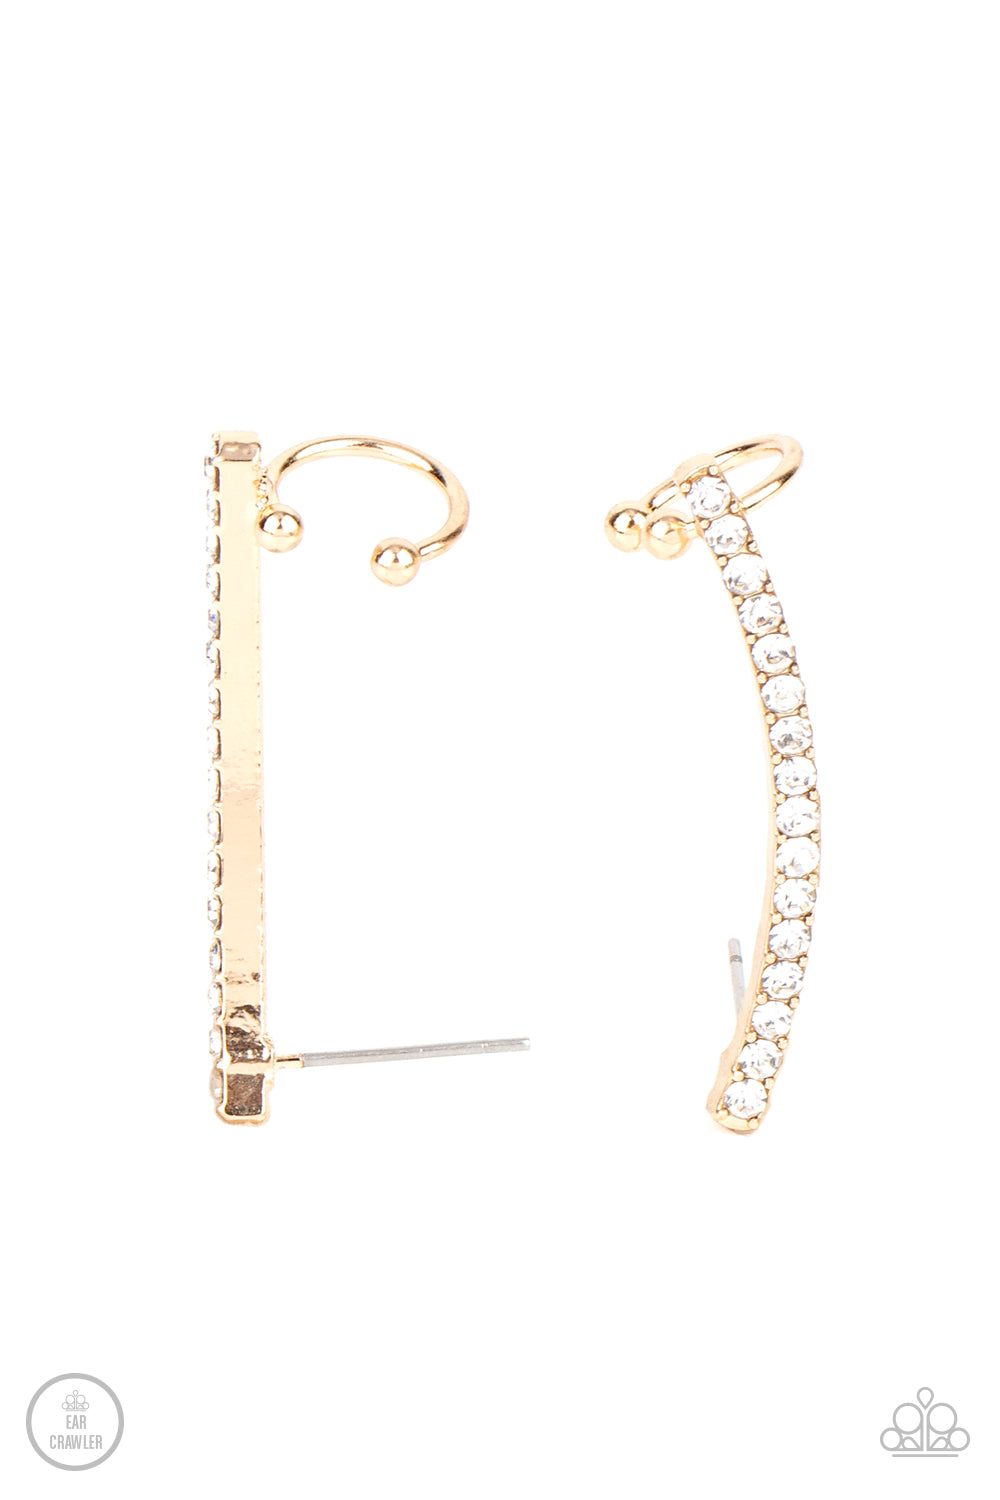 Give Me The SWOOP - Gold Ear Crawler Earrings - Princess Glam Shop